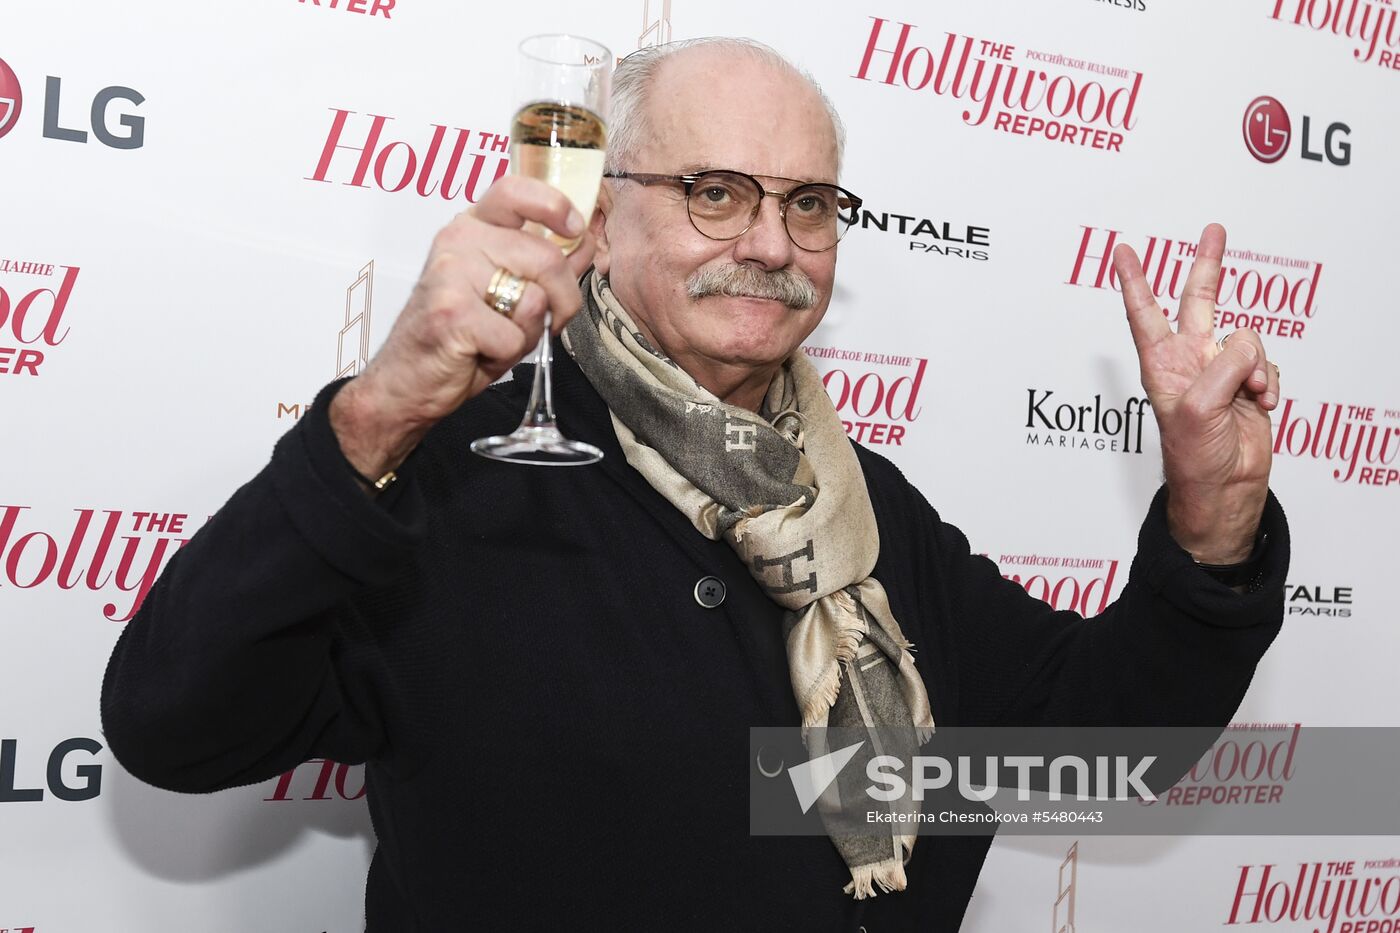 The Hollywood Reporter magazine's White Party at 2018 Moscow International Film Festival